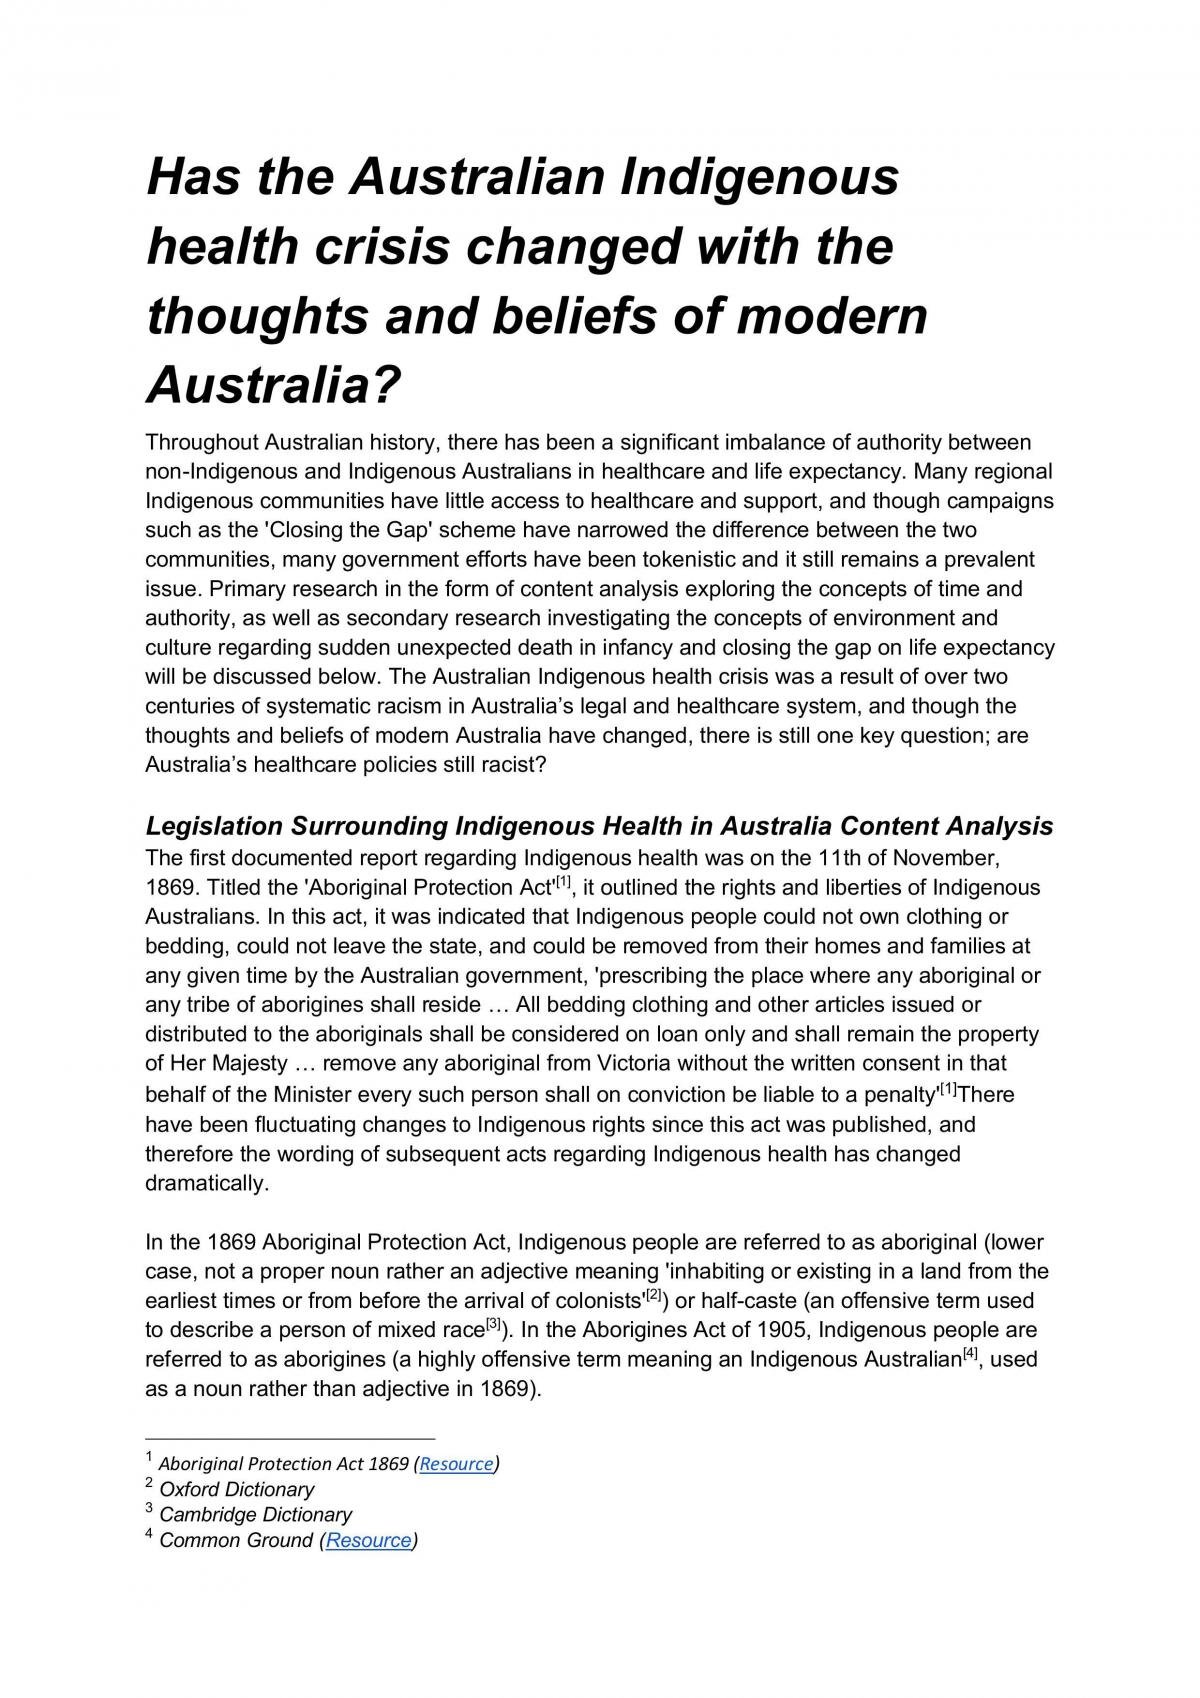 Has the Australian Indigenous Health Crisis Changed with the Thoughts and Beliefs of Modern Australia? - Page 1